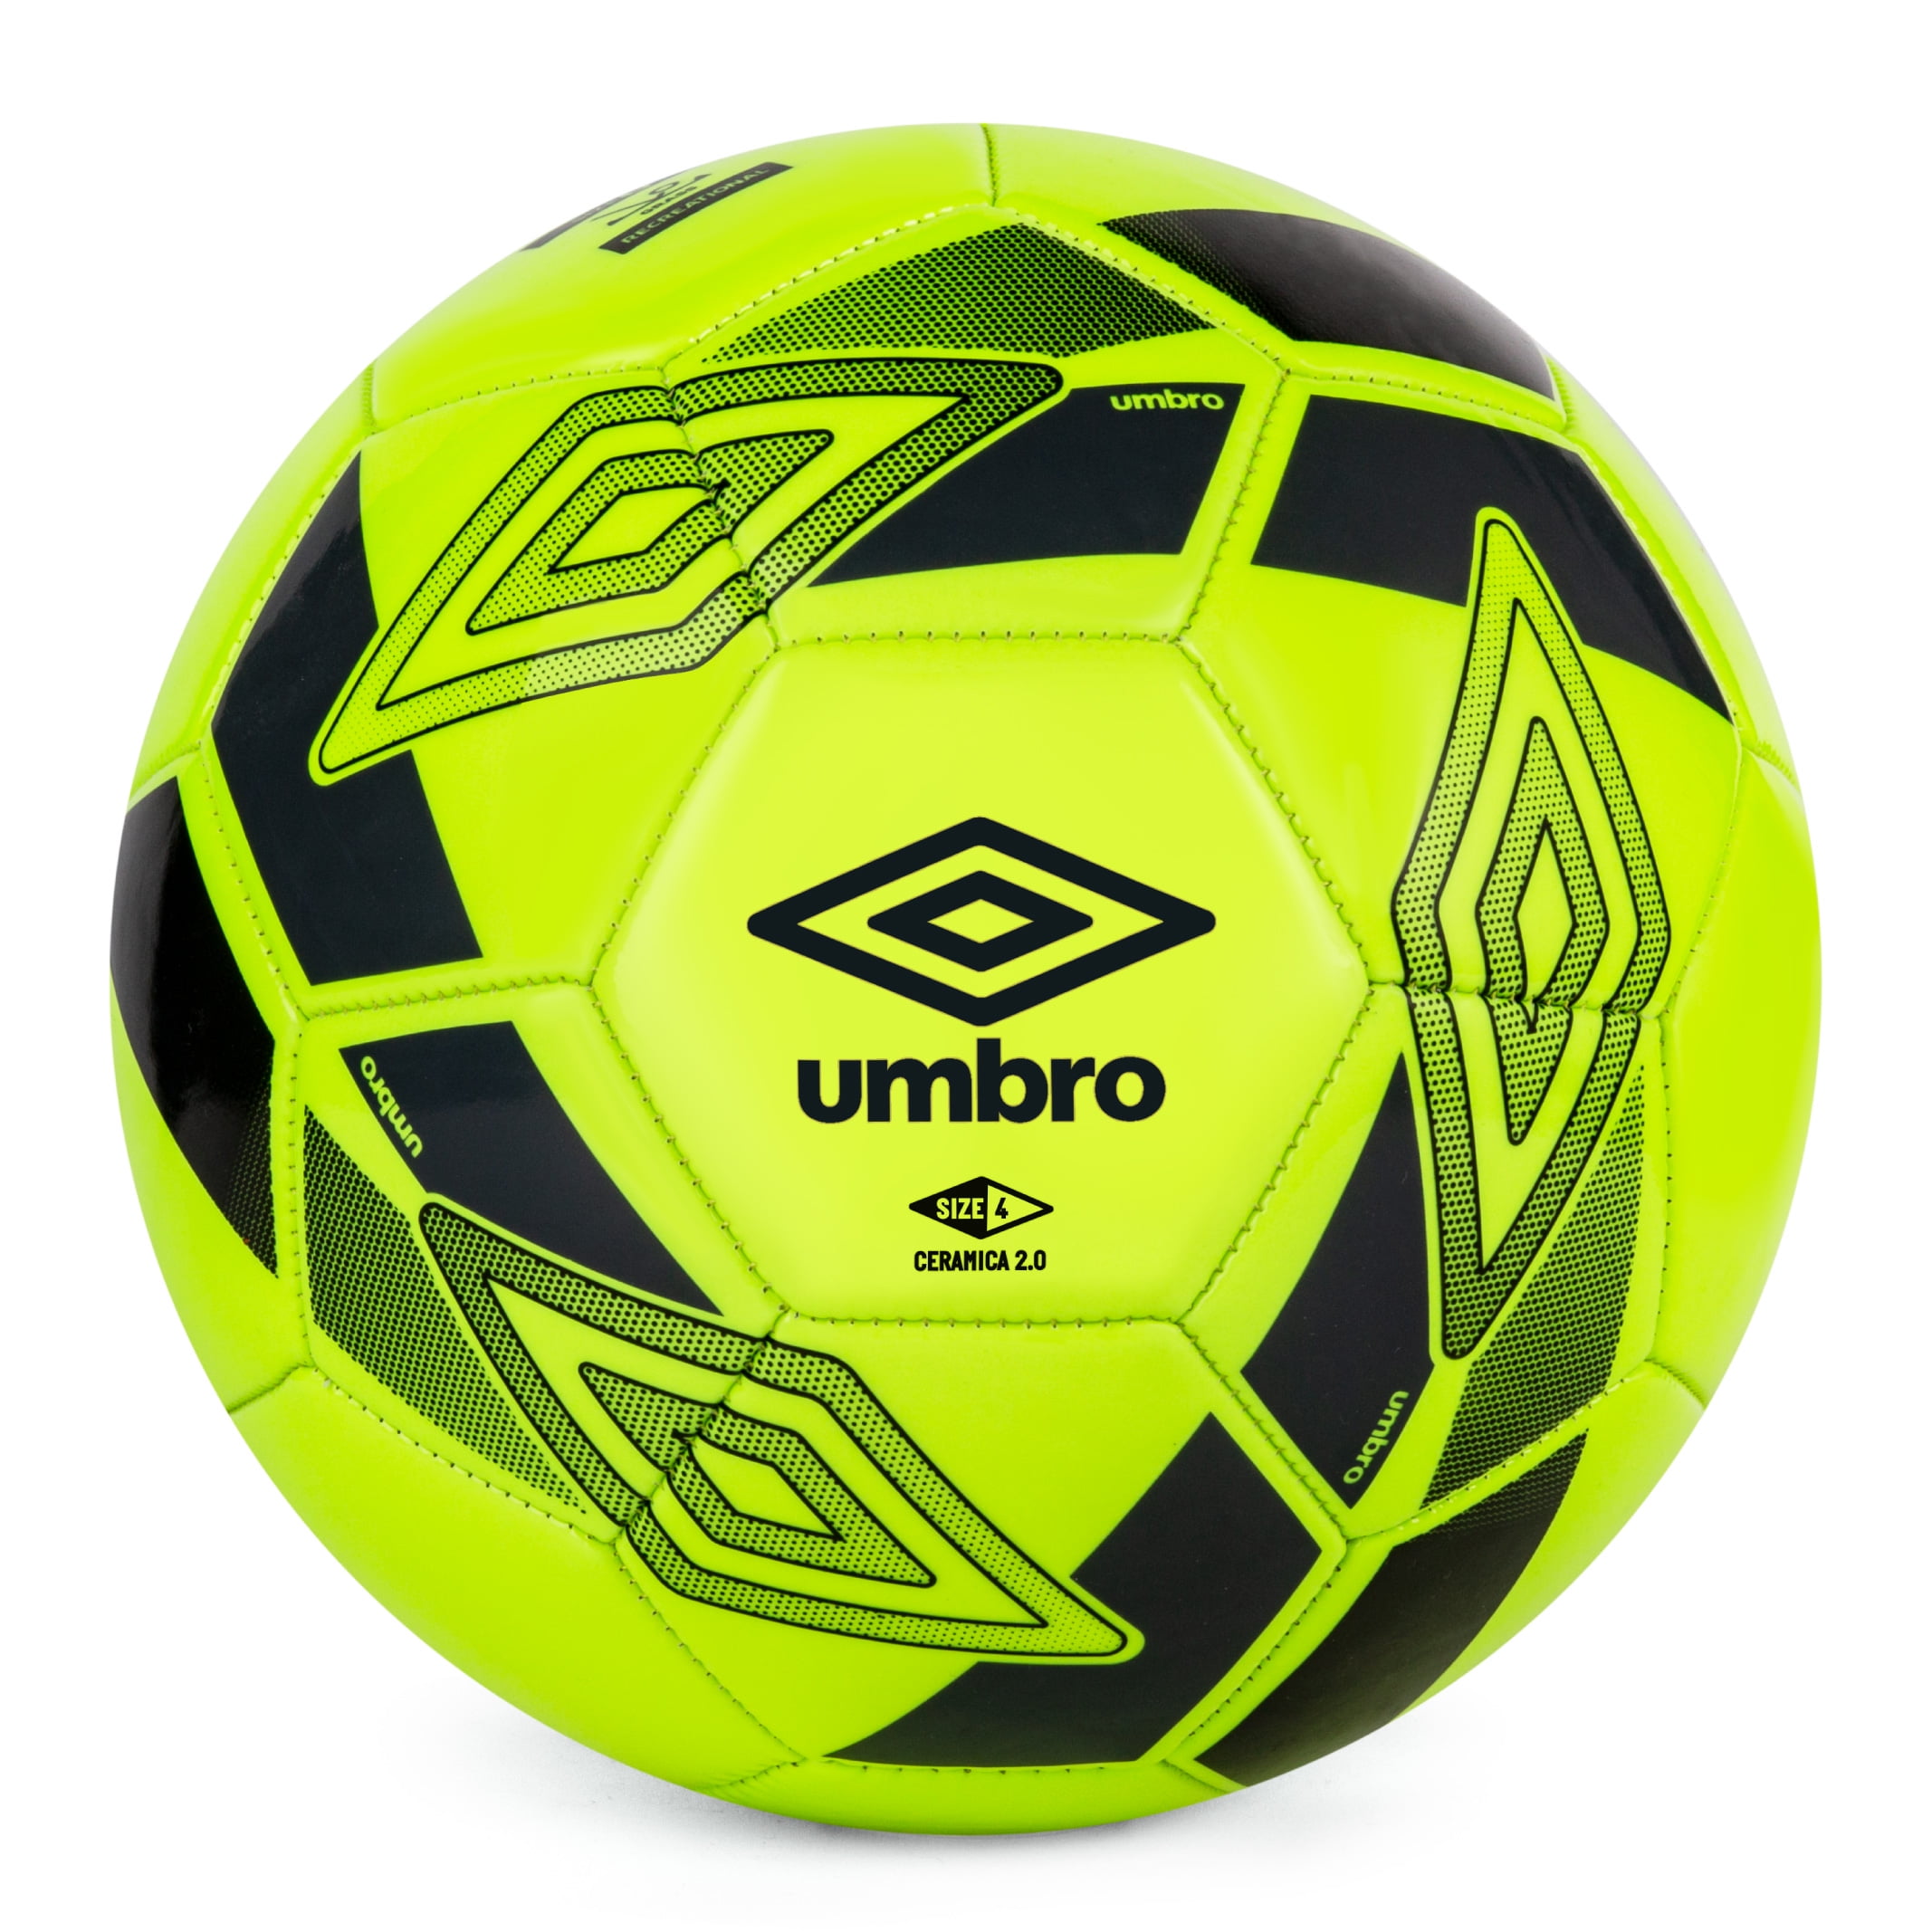 Grand Champ Football Training Size 5 and Mini 1 Soccer ball for kids/Children Indoor/Outdoor 